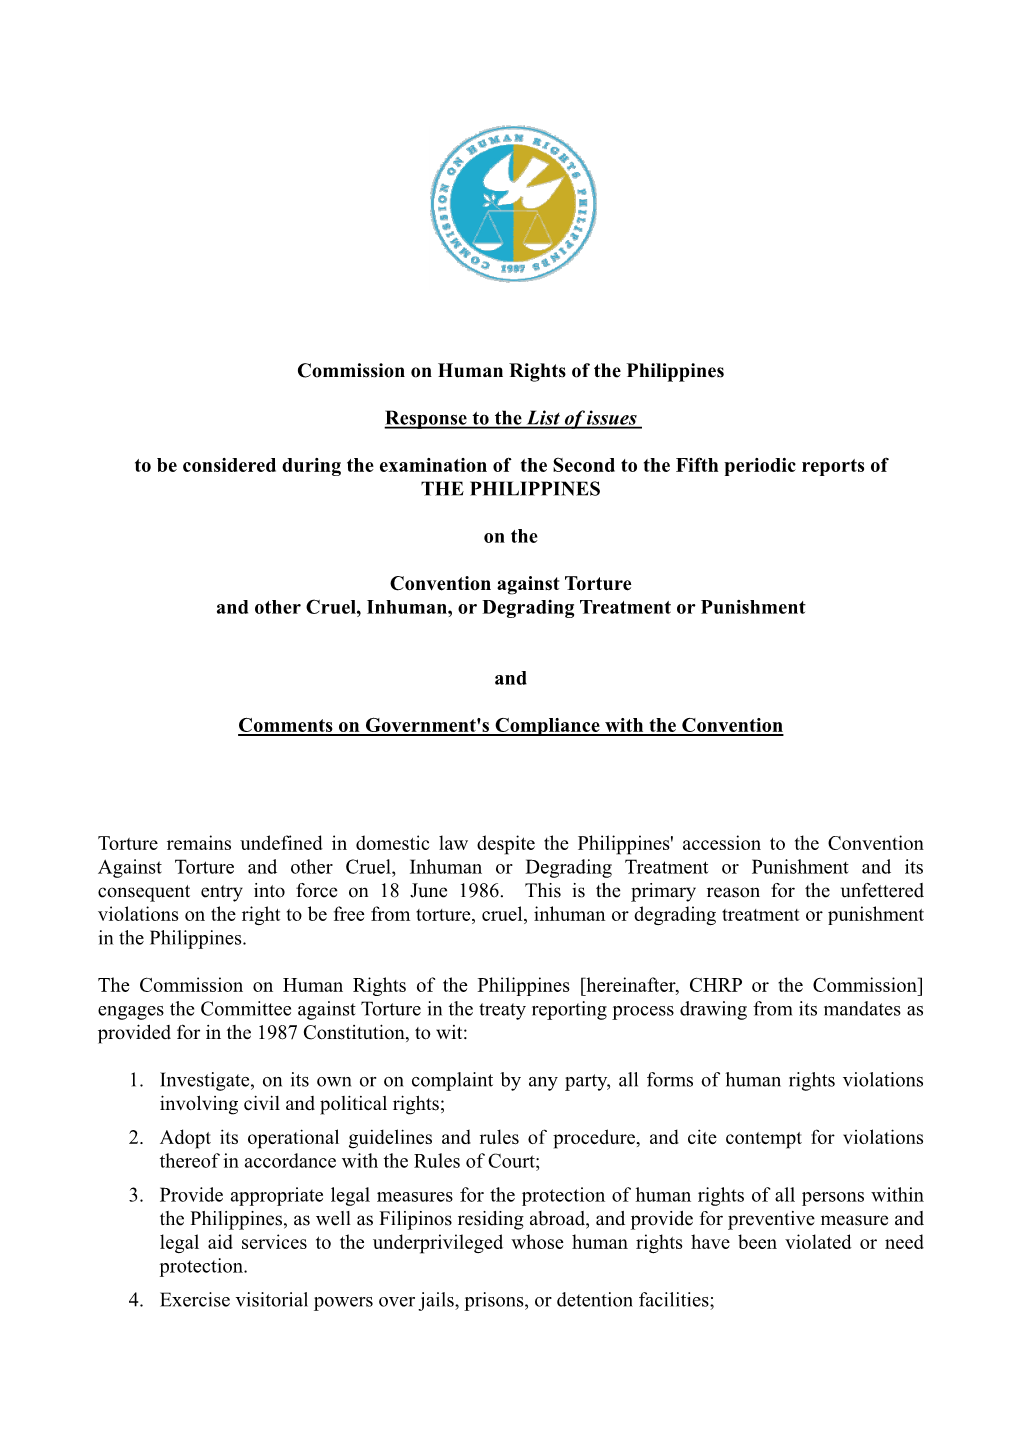 Commission on Human Rights of the Philippines Response to the List Of